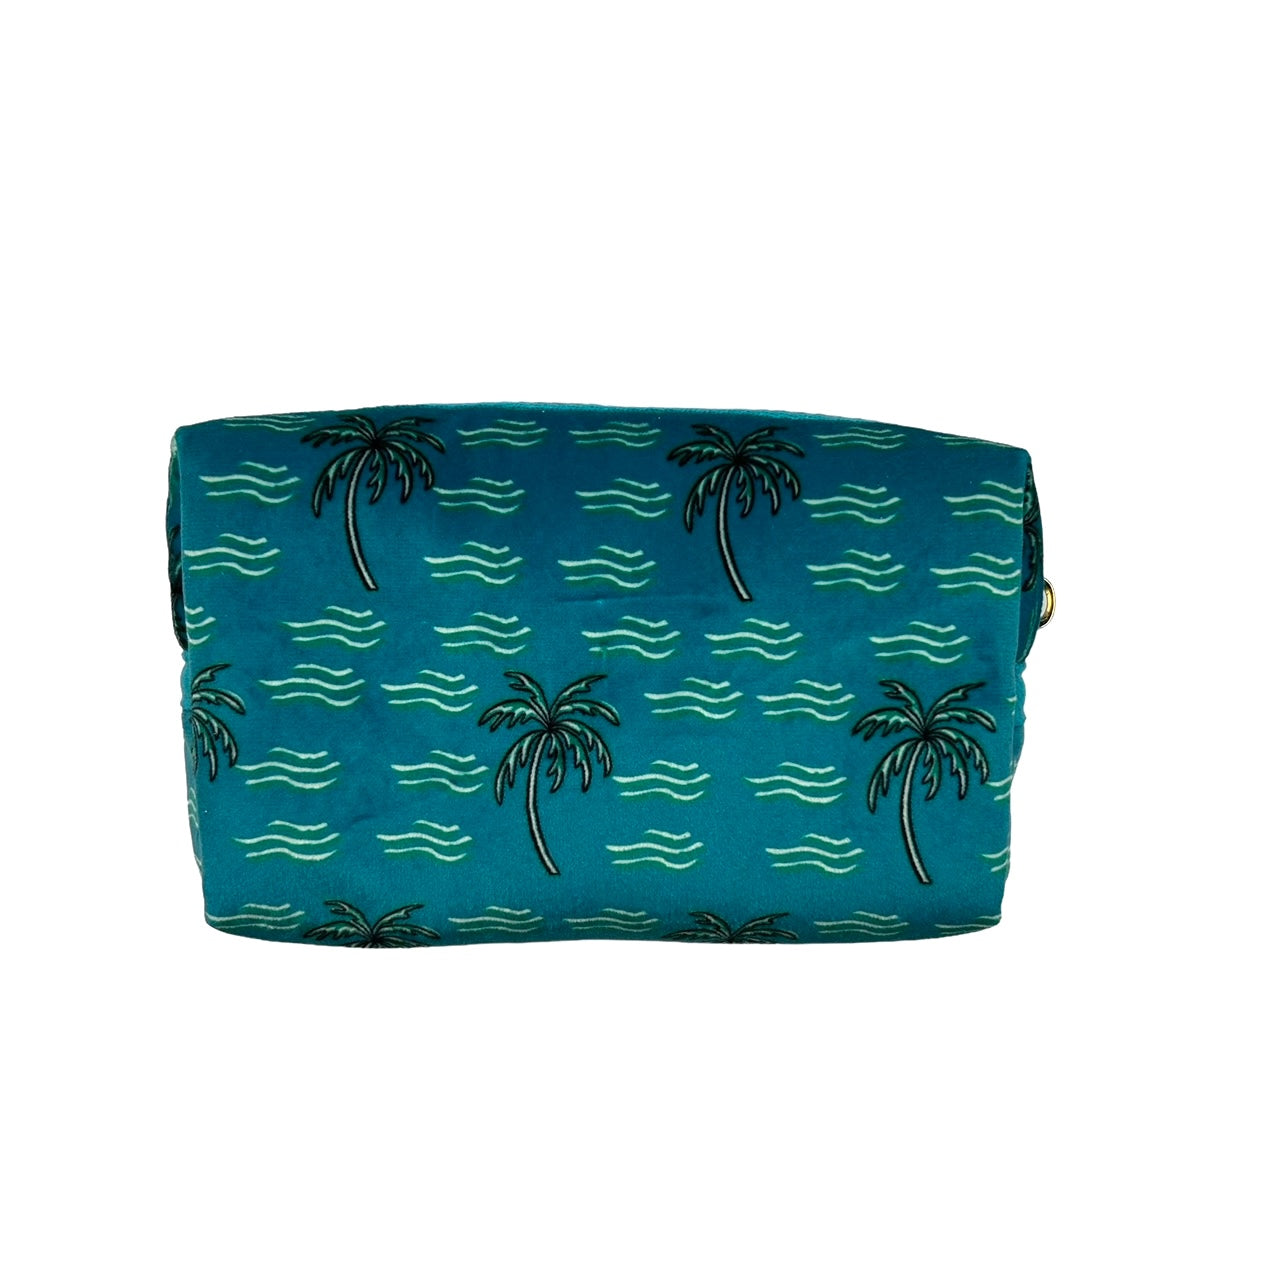 Teal palm tree make-up bag - recycled velvet, large and small